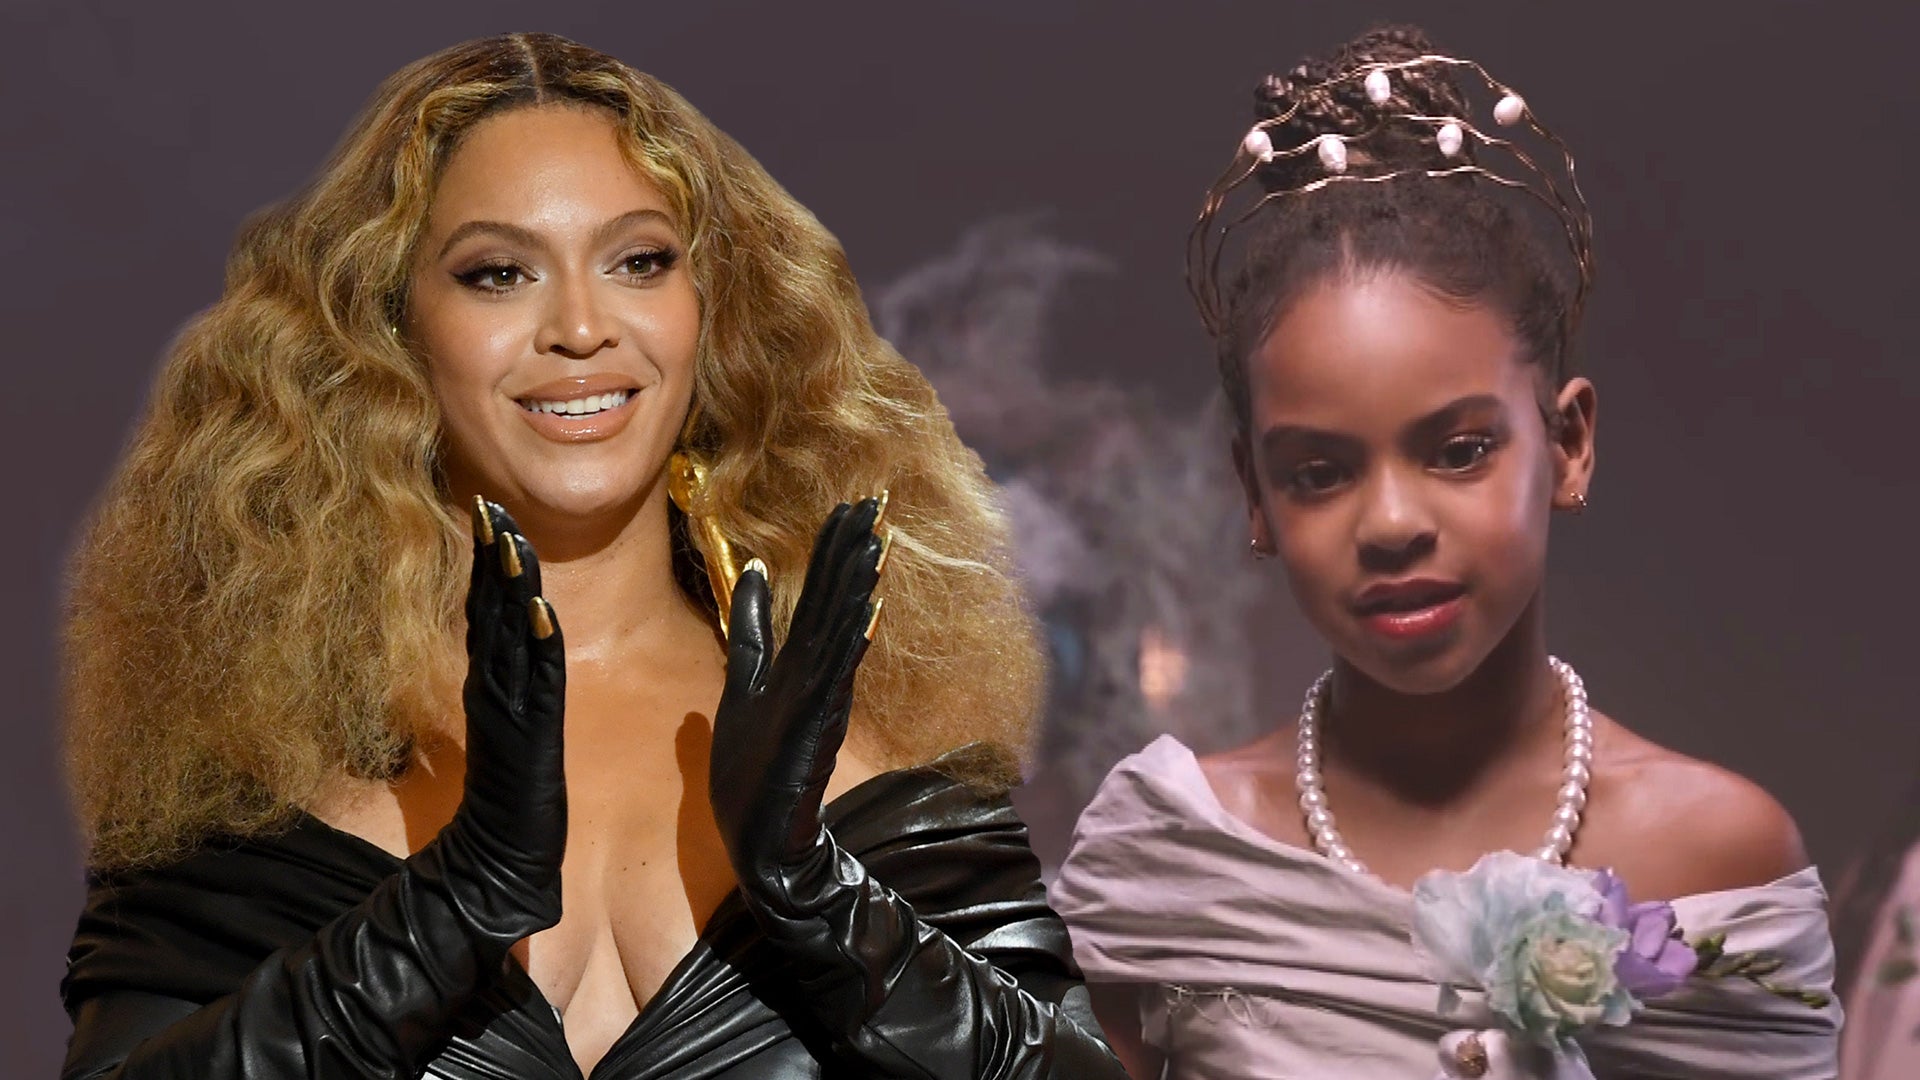 Every Time Blue Ivy Carter Has Joined Beyoncé on Stage